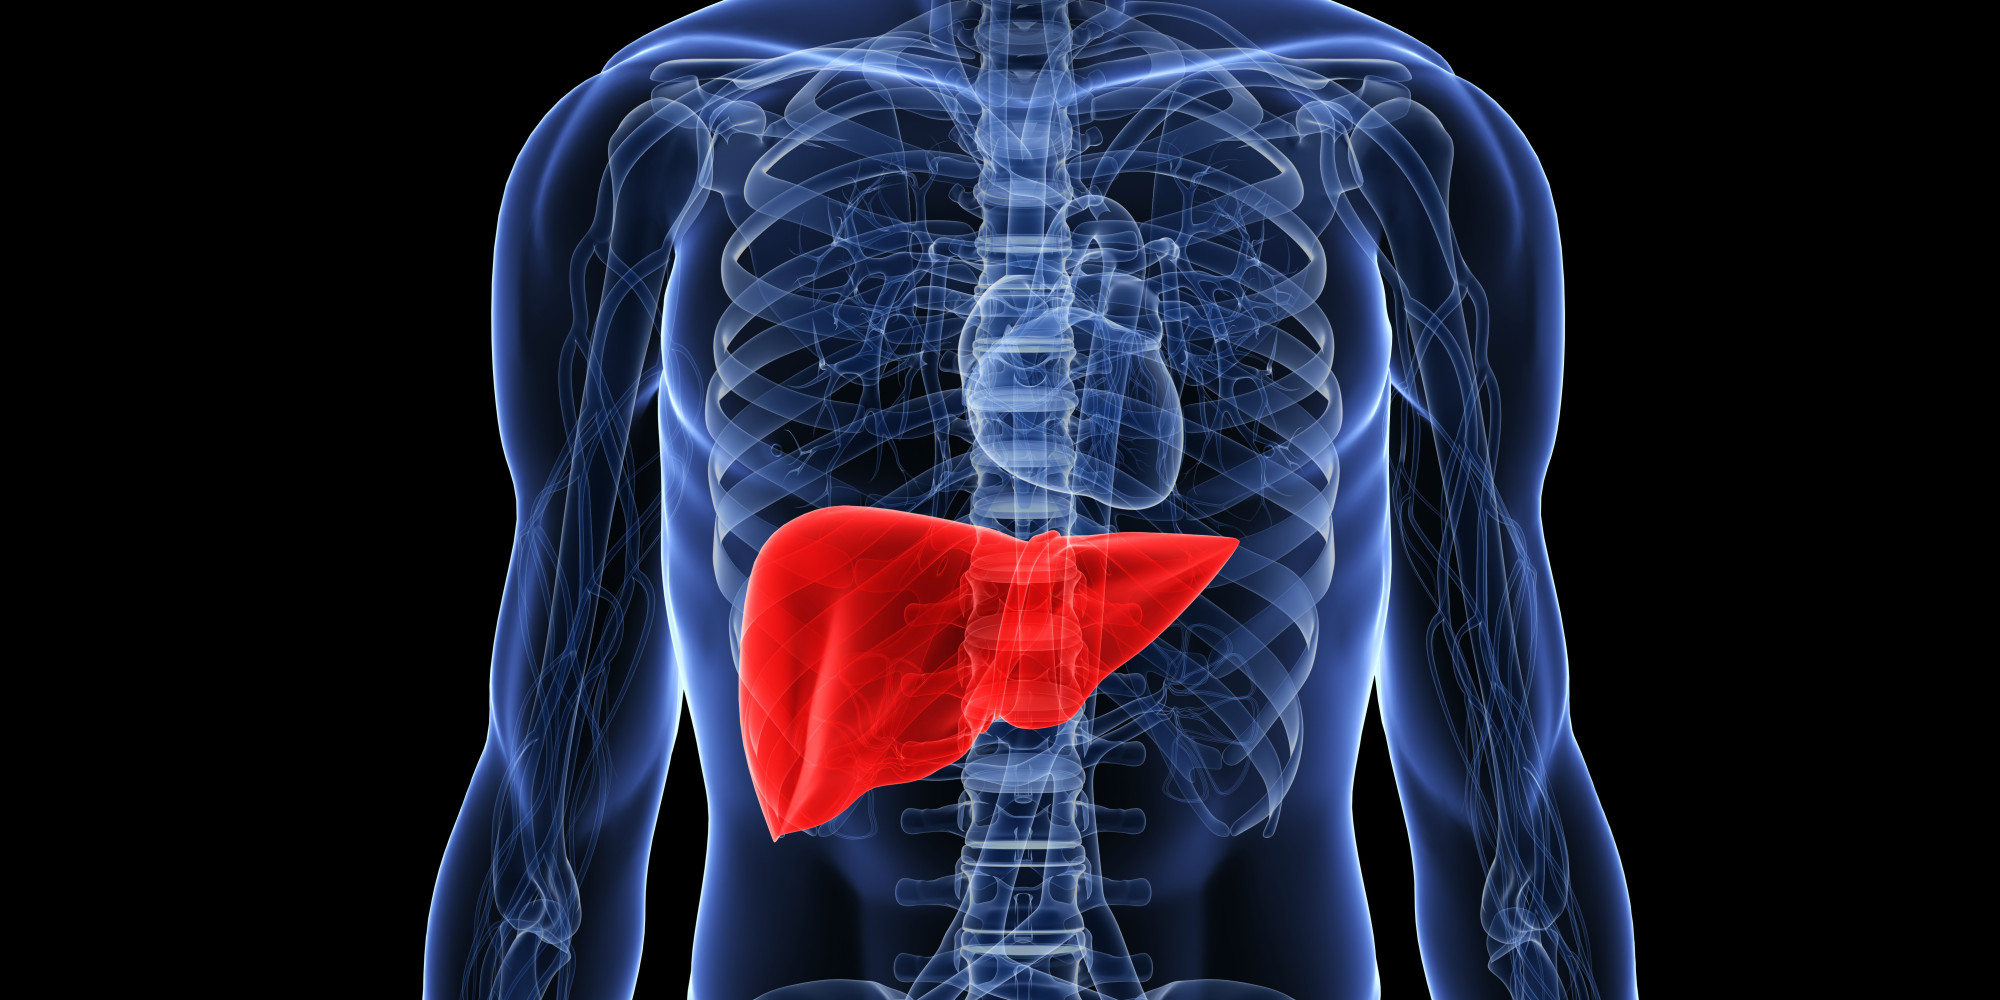 5 Types of Hepatitis You Must Know Symptoms, Causes and Treatment